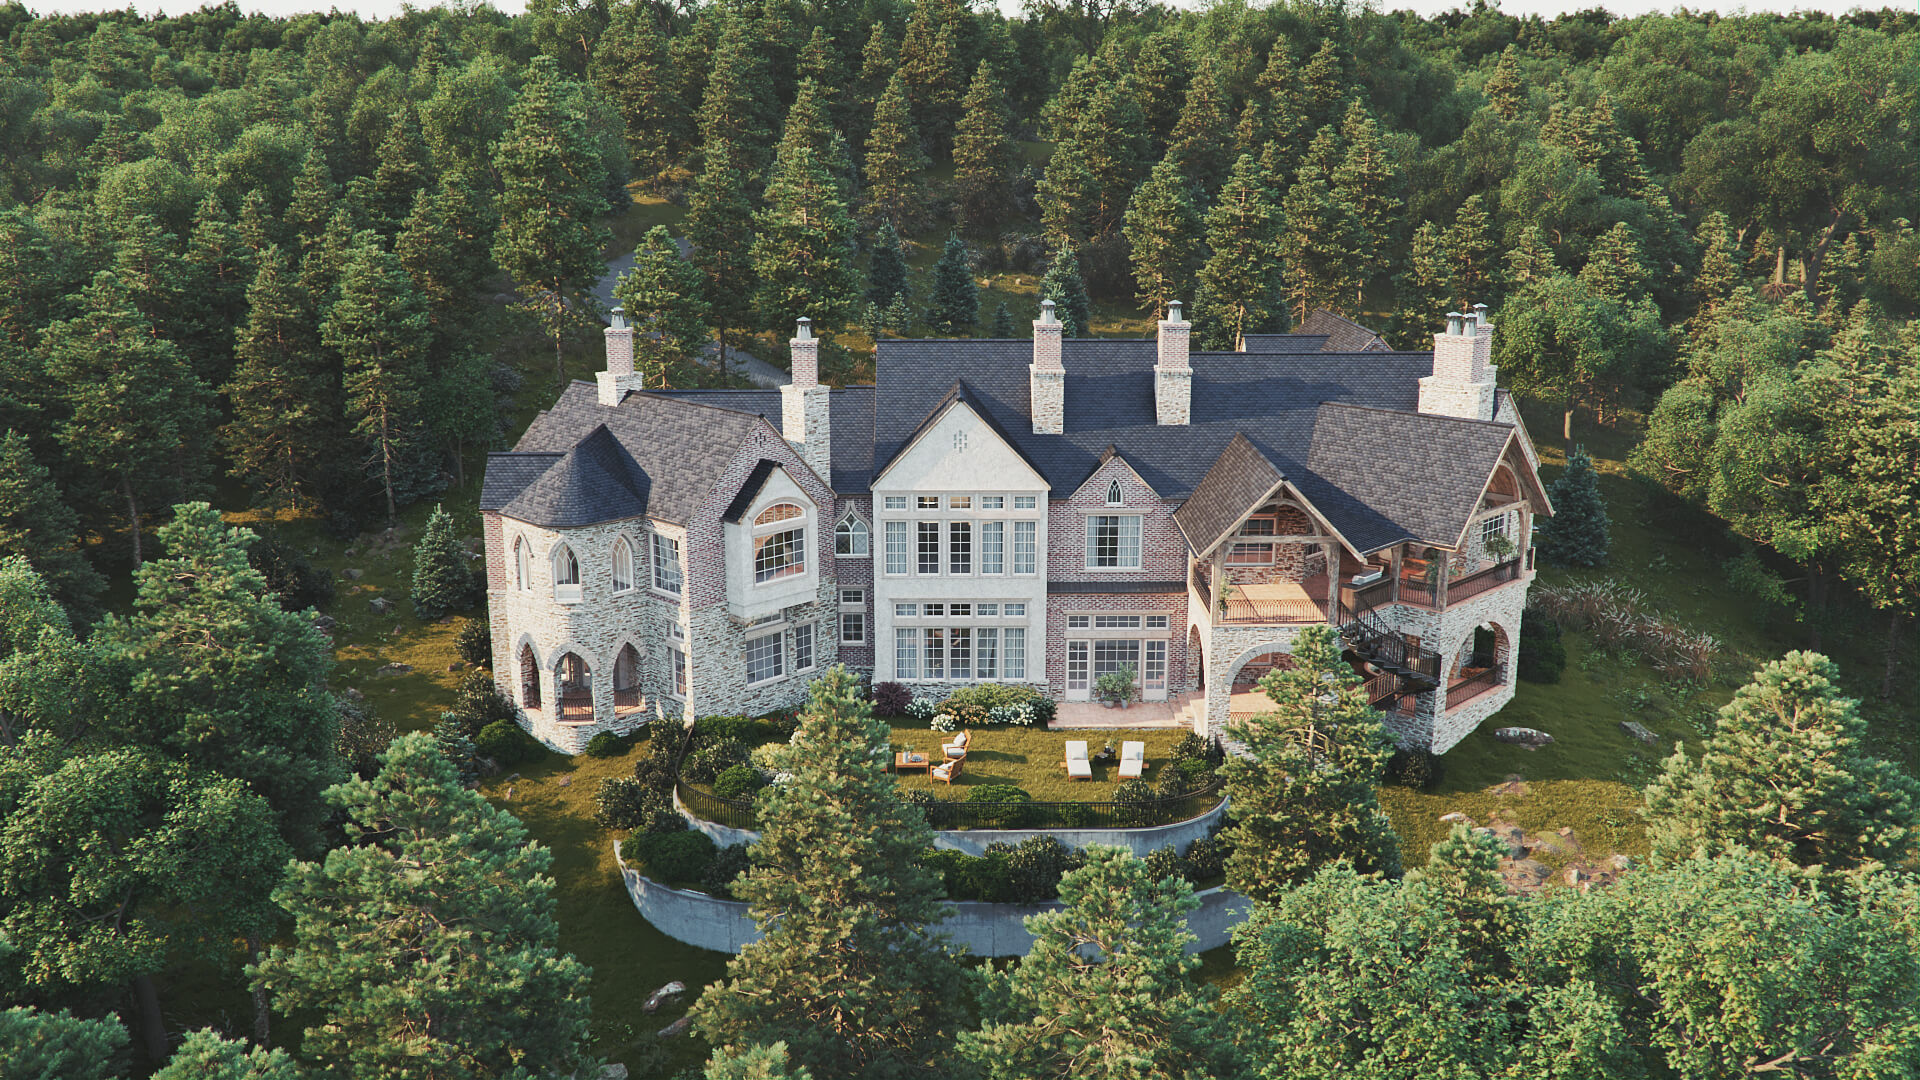 3D Visualization of a Magnificent Mansion in North Carolina